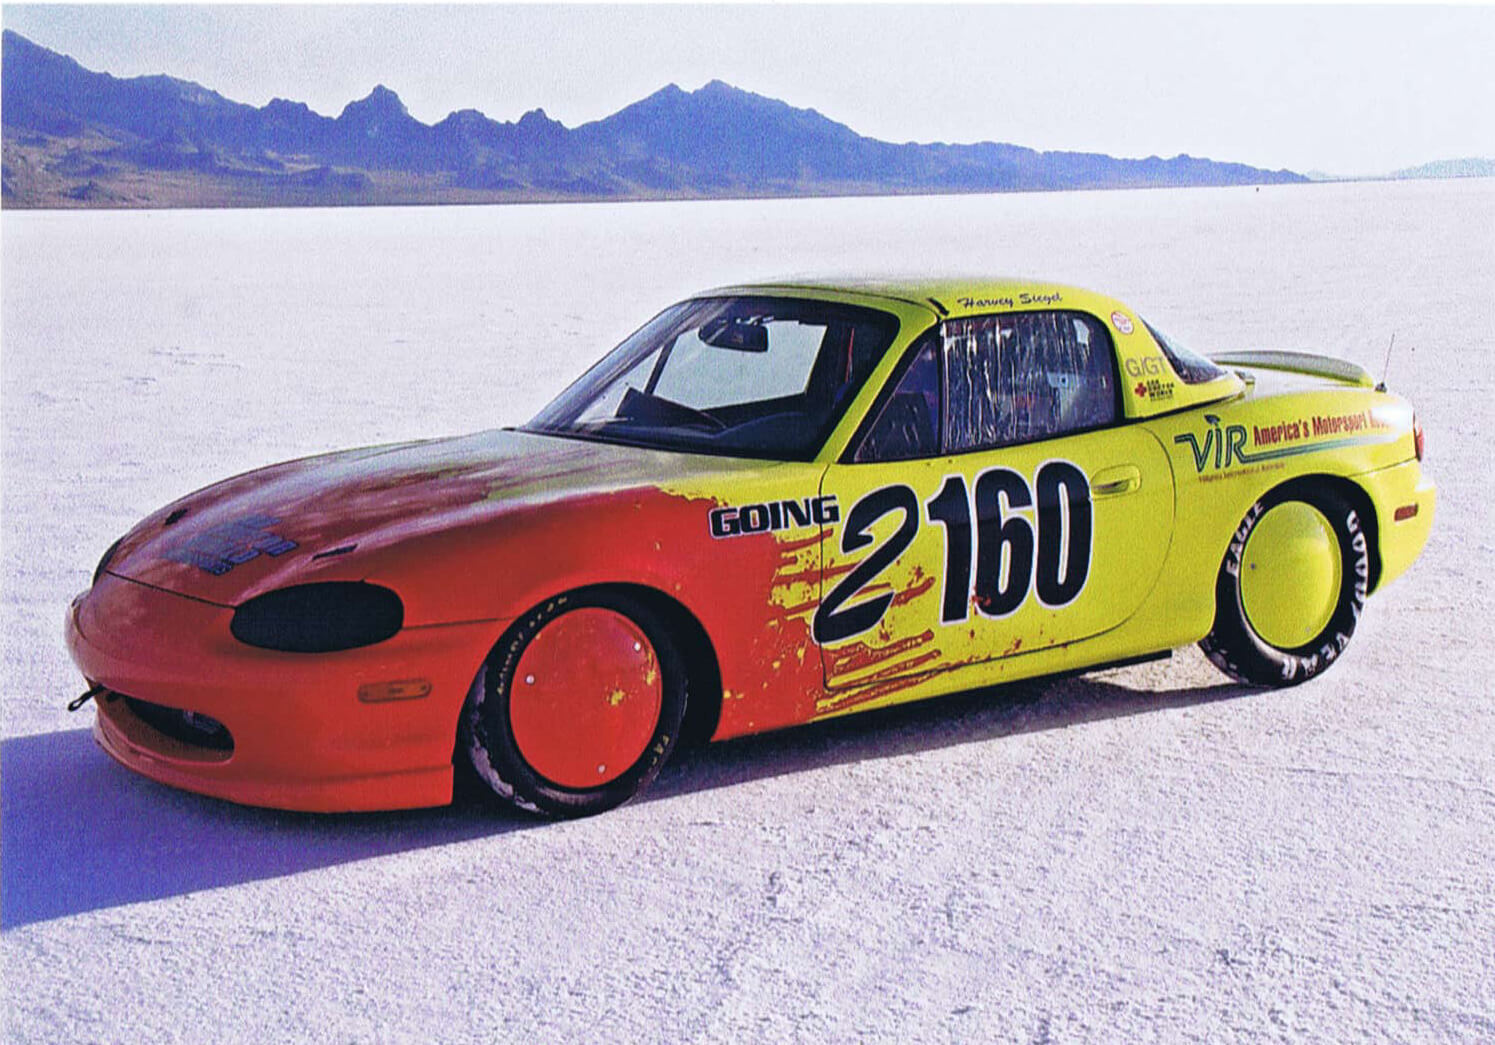 This Mazda Miata Is Going Straight to One-Sixty in An Upcoming Piston Charity Auction